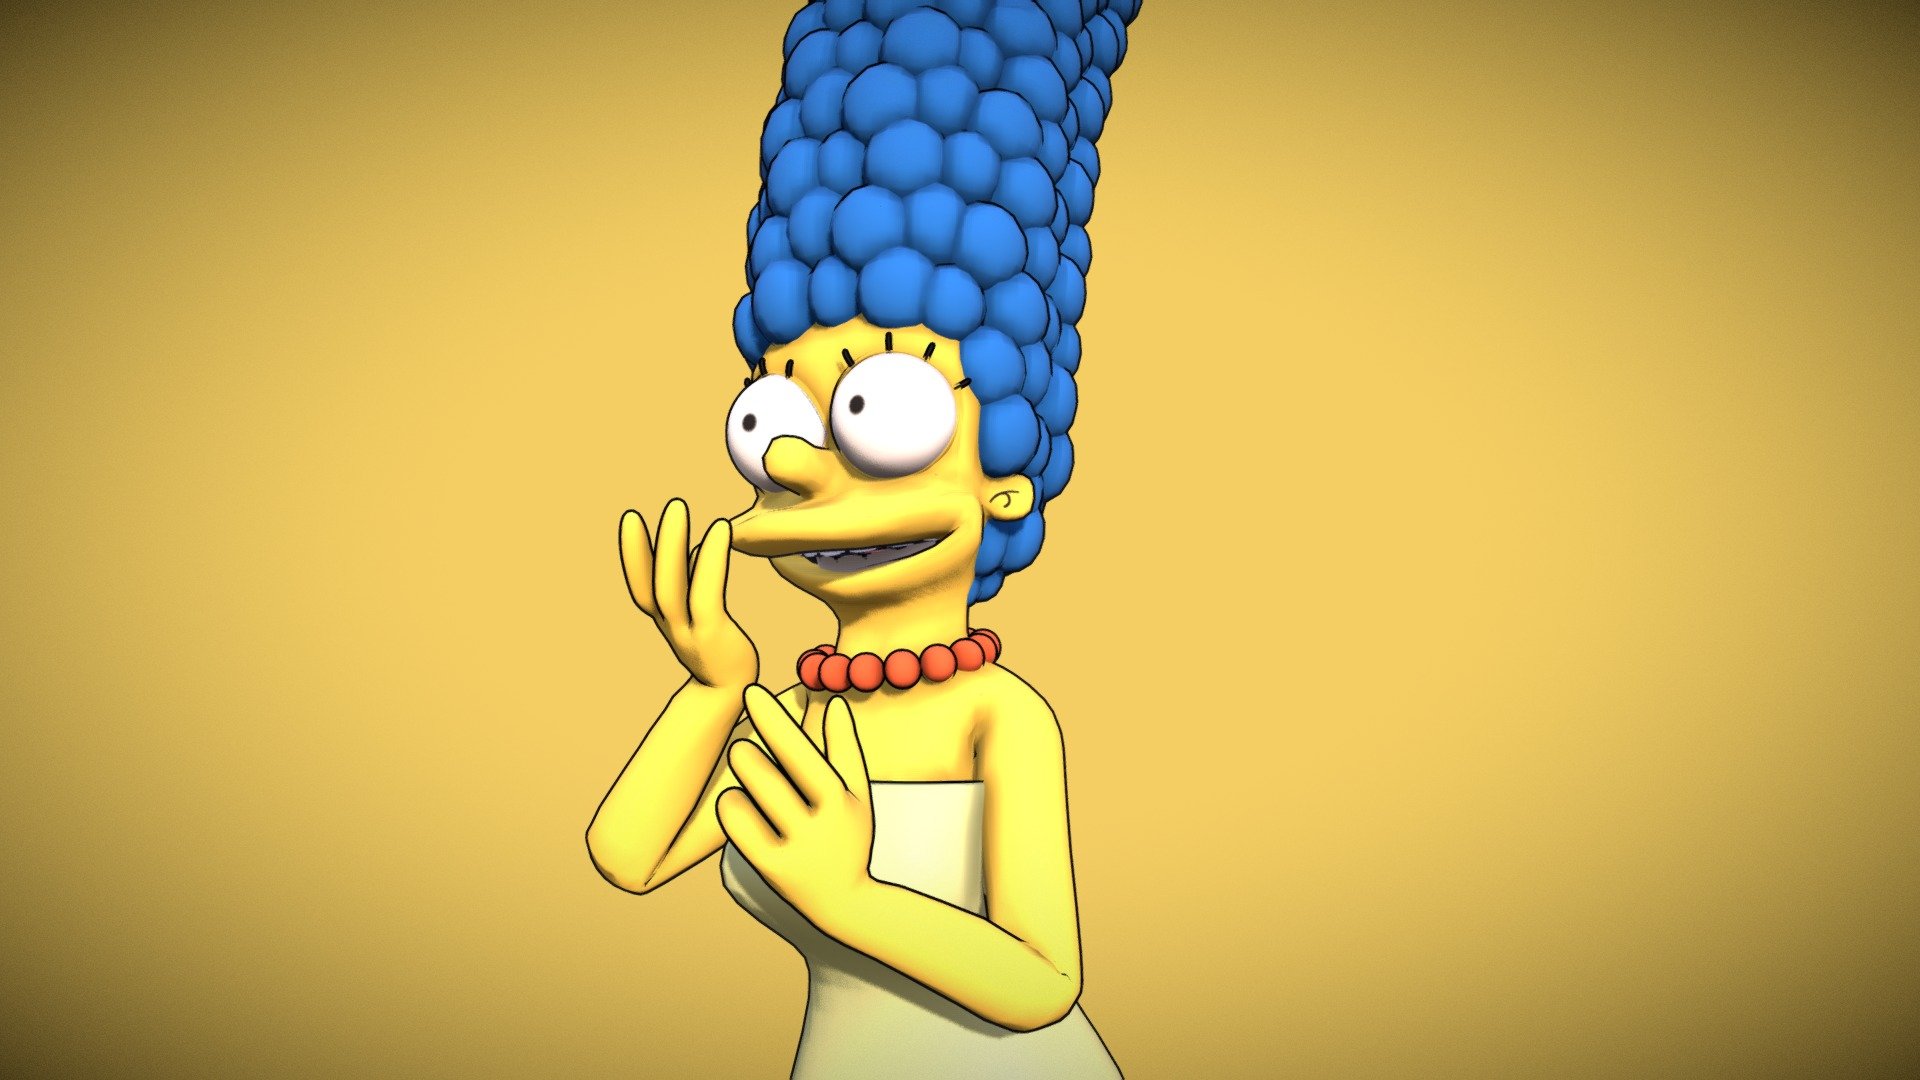 Marge Simpson Download Free 3d Model By Placidone 5d5c247 Sketchfab 